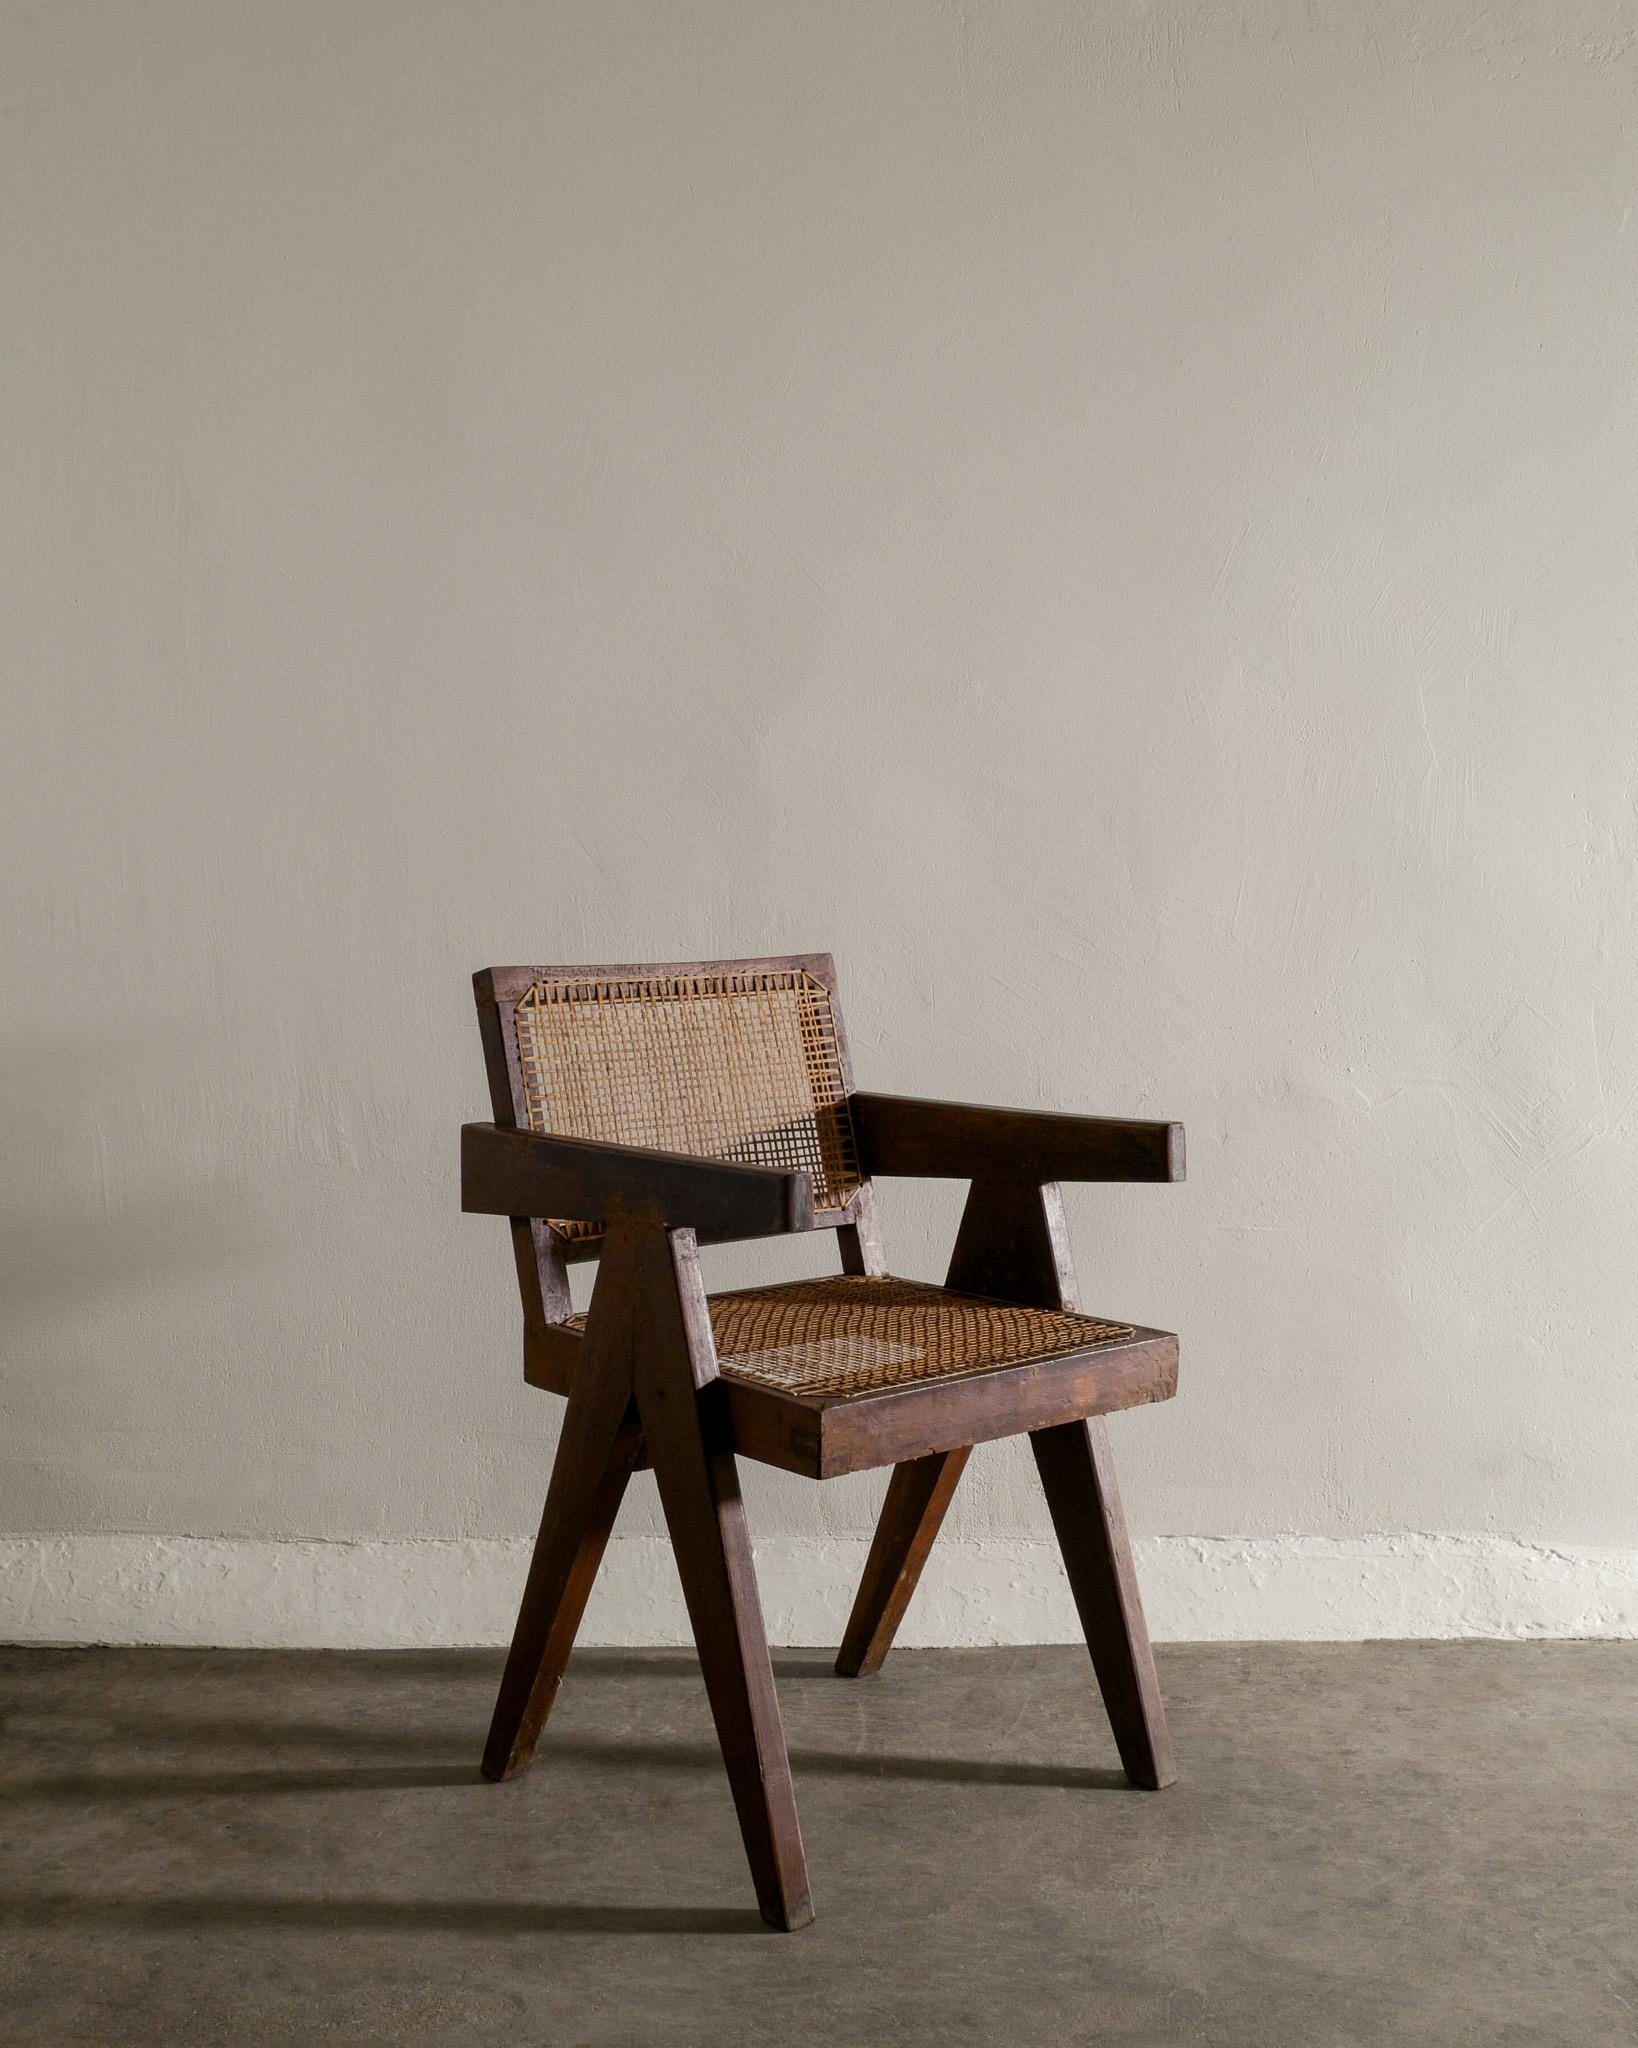 Rare mid century office dining chair in solid stained teak and rattan by Pierre Jeanneret / Le Corbusier for their Chandigarh project in India 1950s. In good vintage condition. Signed 